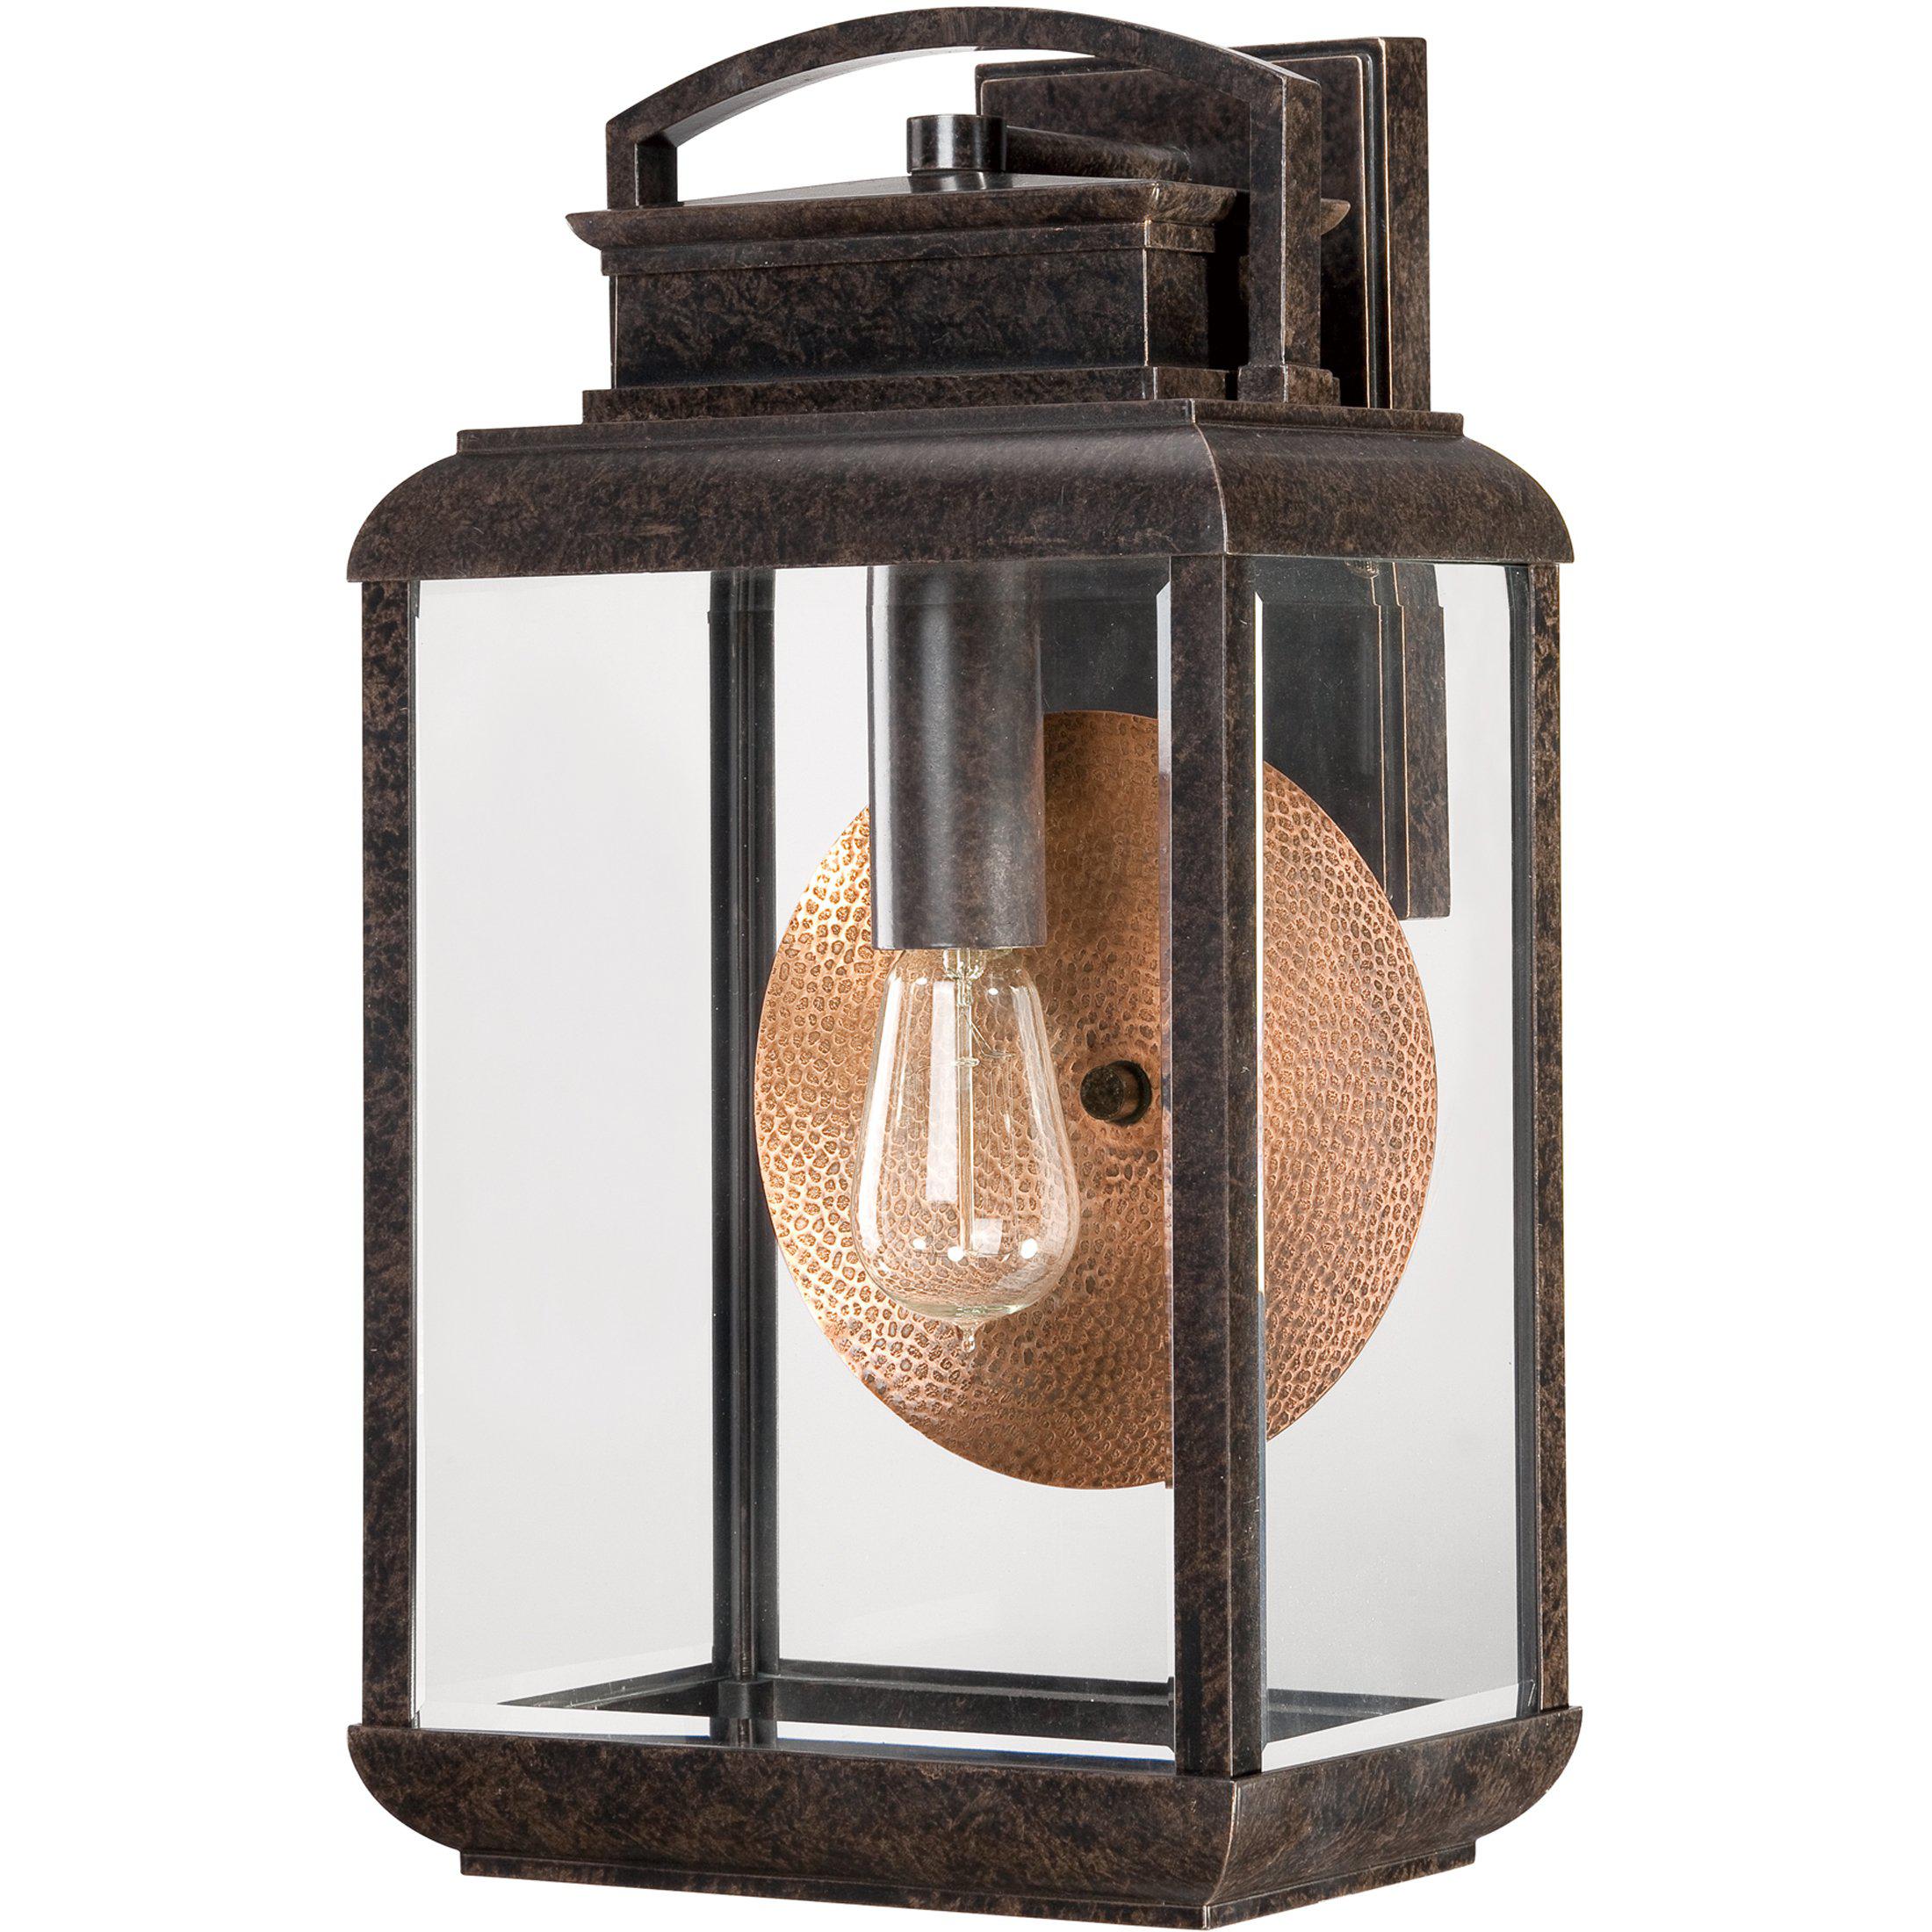 Quoizel  Byron Outdoor Lantern, Large Outdoor l Wall Quoizel   